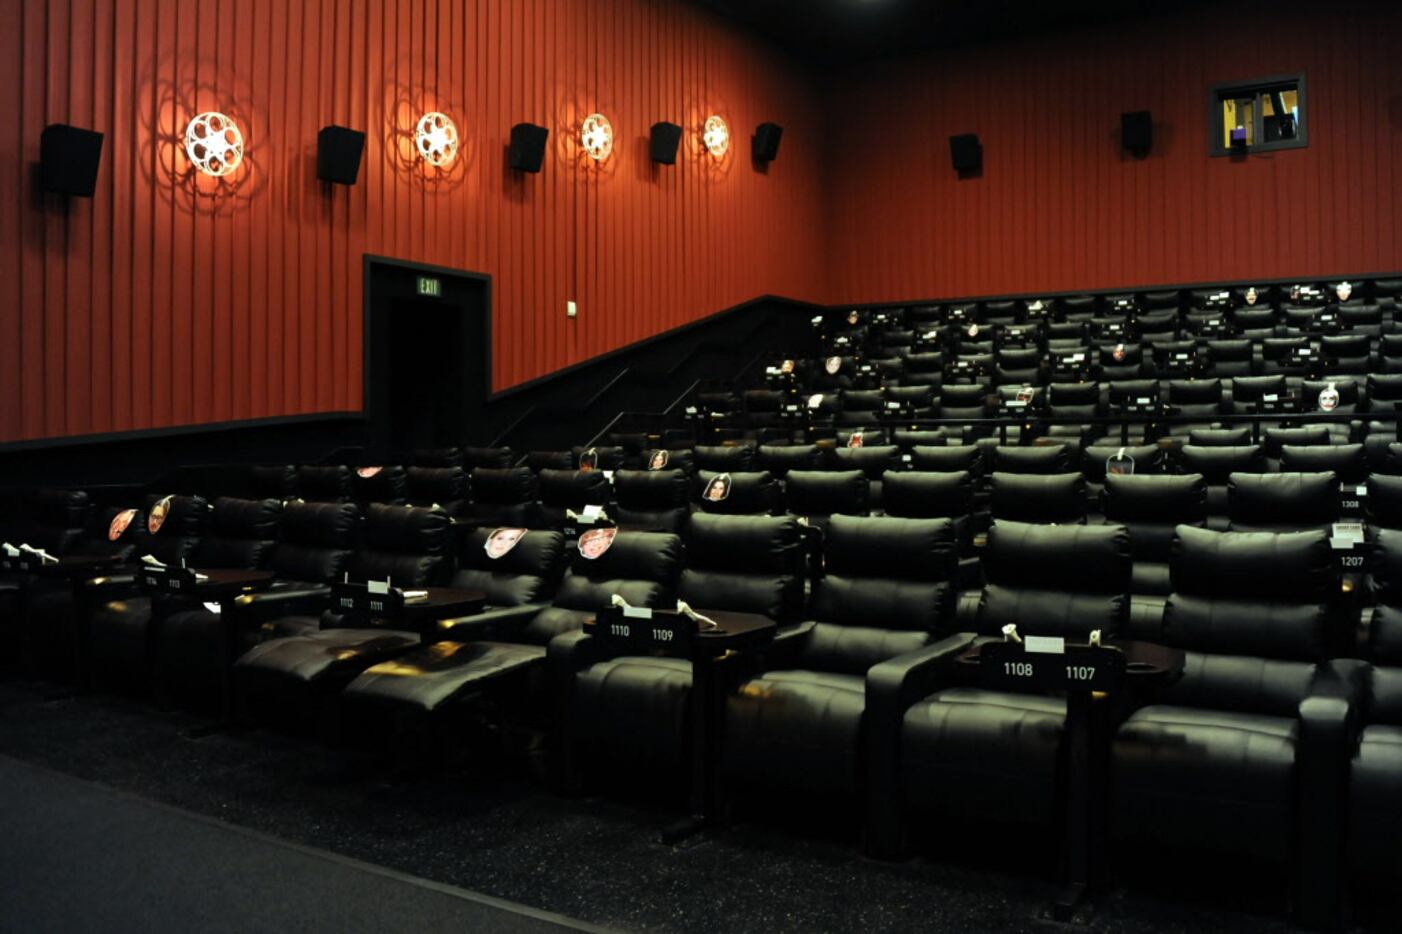 The larger theaters seat 153 guests at Alamo Drafthouse Cinema Dallas.